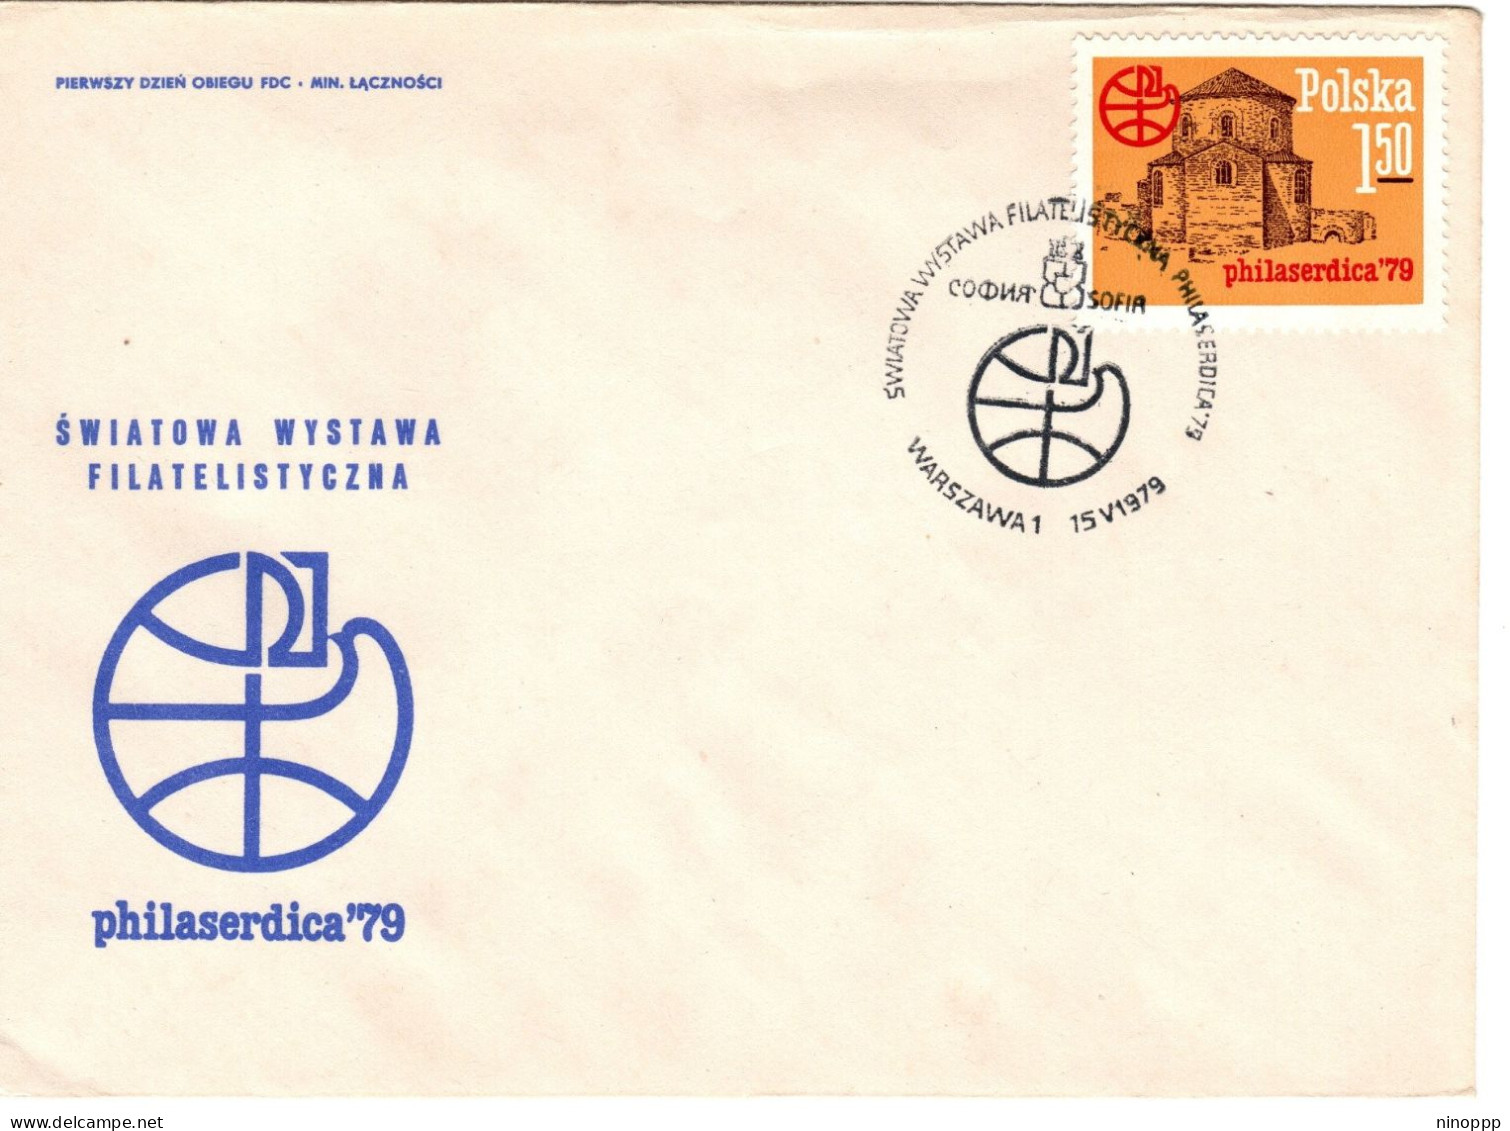 Poland 1979 Philaserdica, First Day Cover - FDC